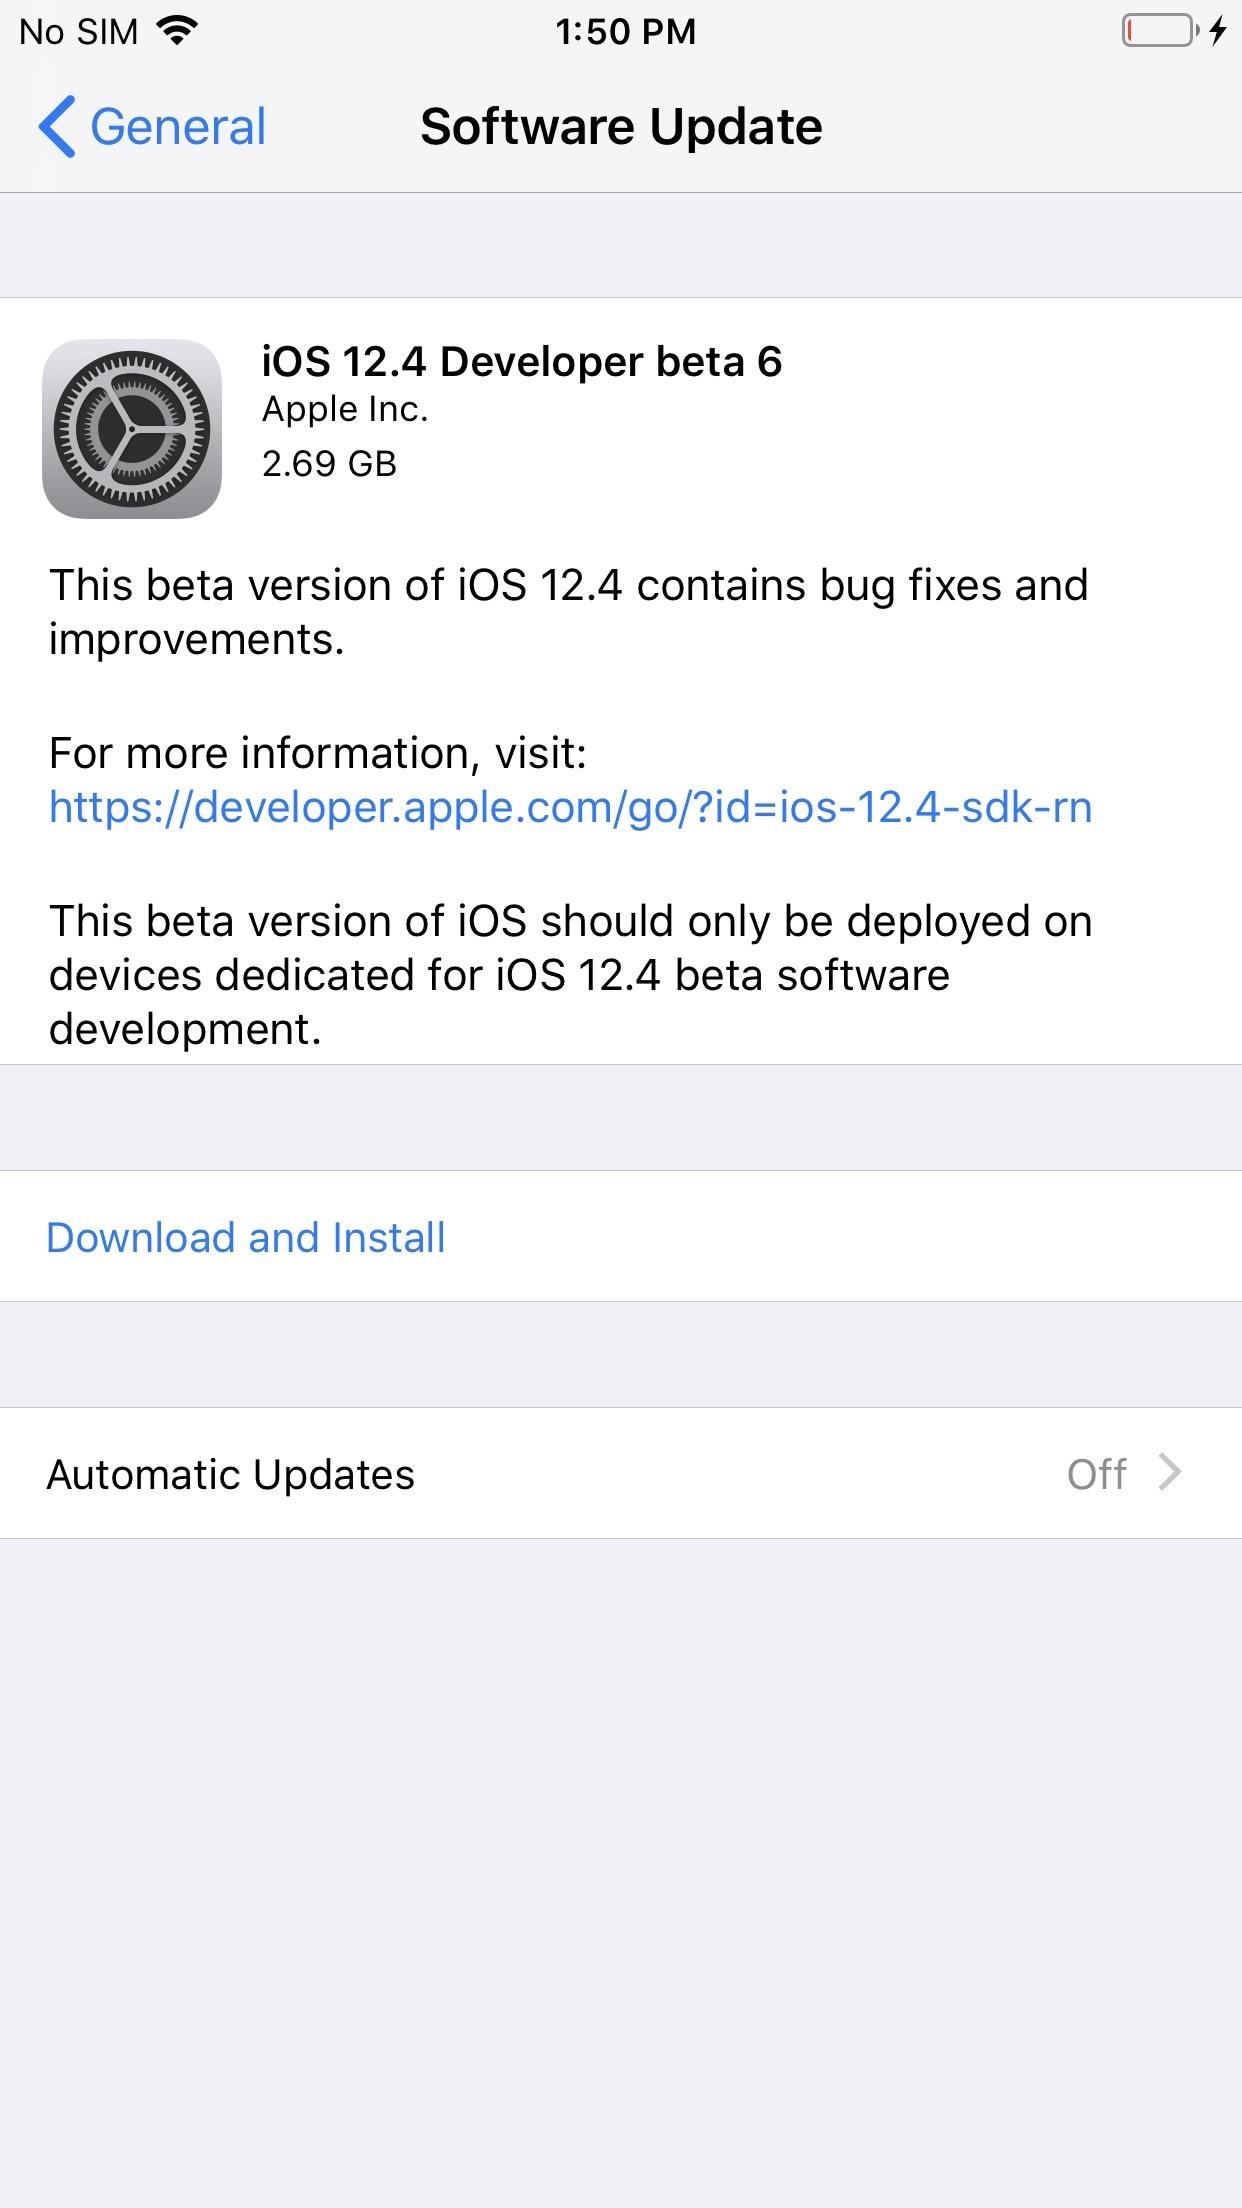 Apple Just Released iOS 12.4 Beta 6 for Developers & Public Testers